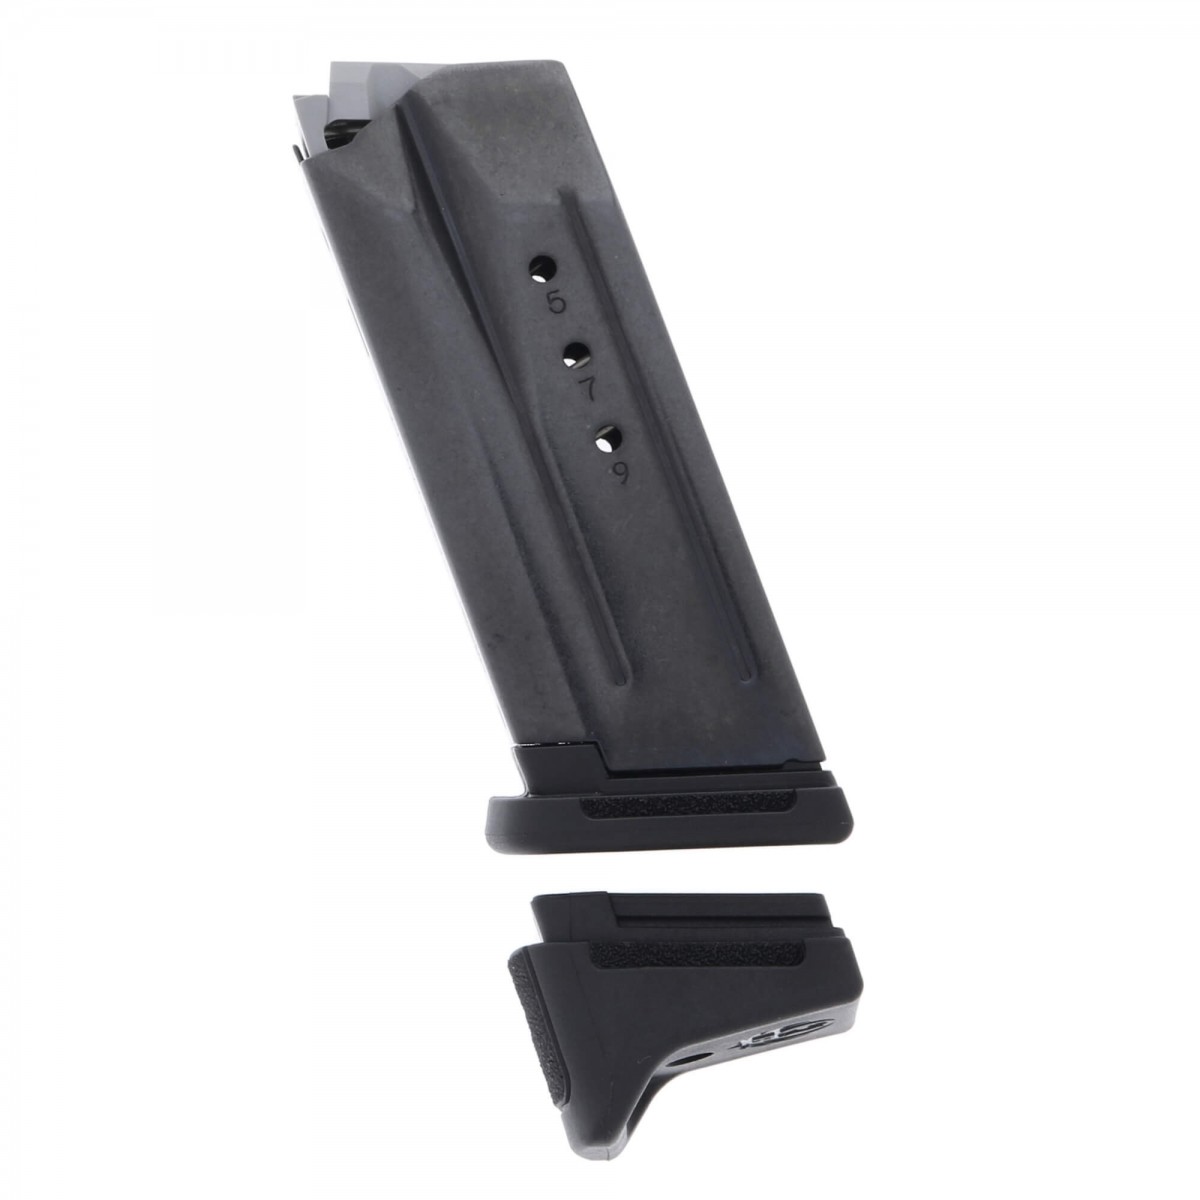 Ruger Security-9 Compact 9mm 10 Round Magazine Extension 90667 for sale online 